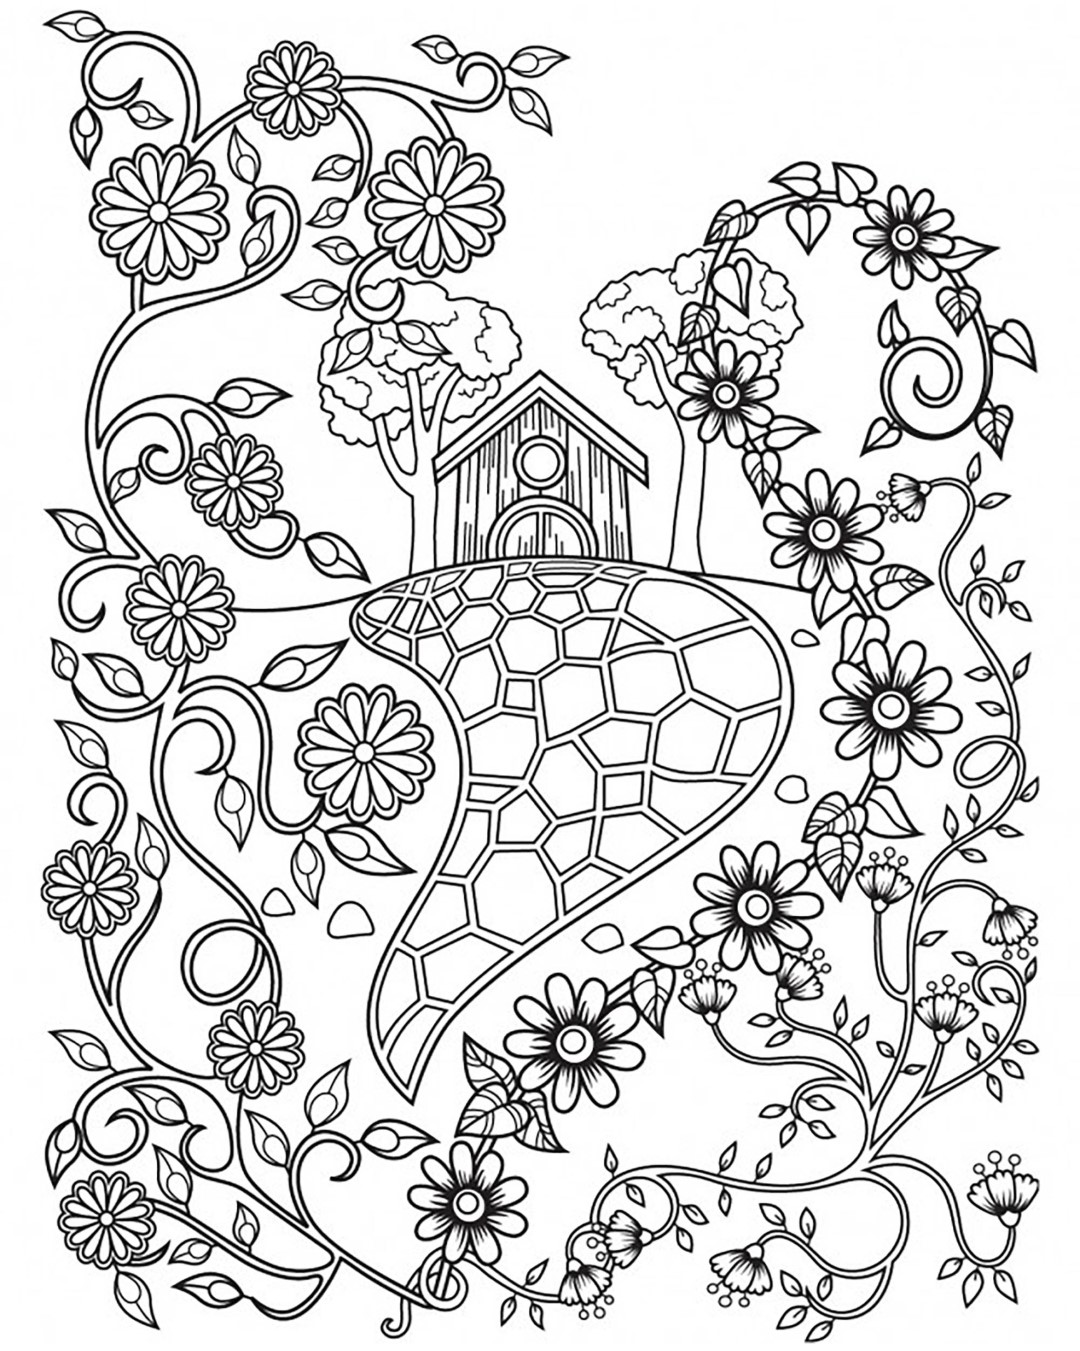 House Coloring Pages – coloring.rocks!coloring.rocks